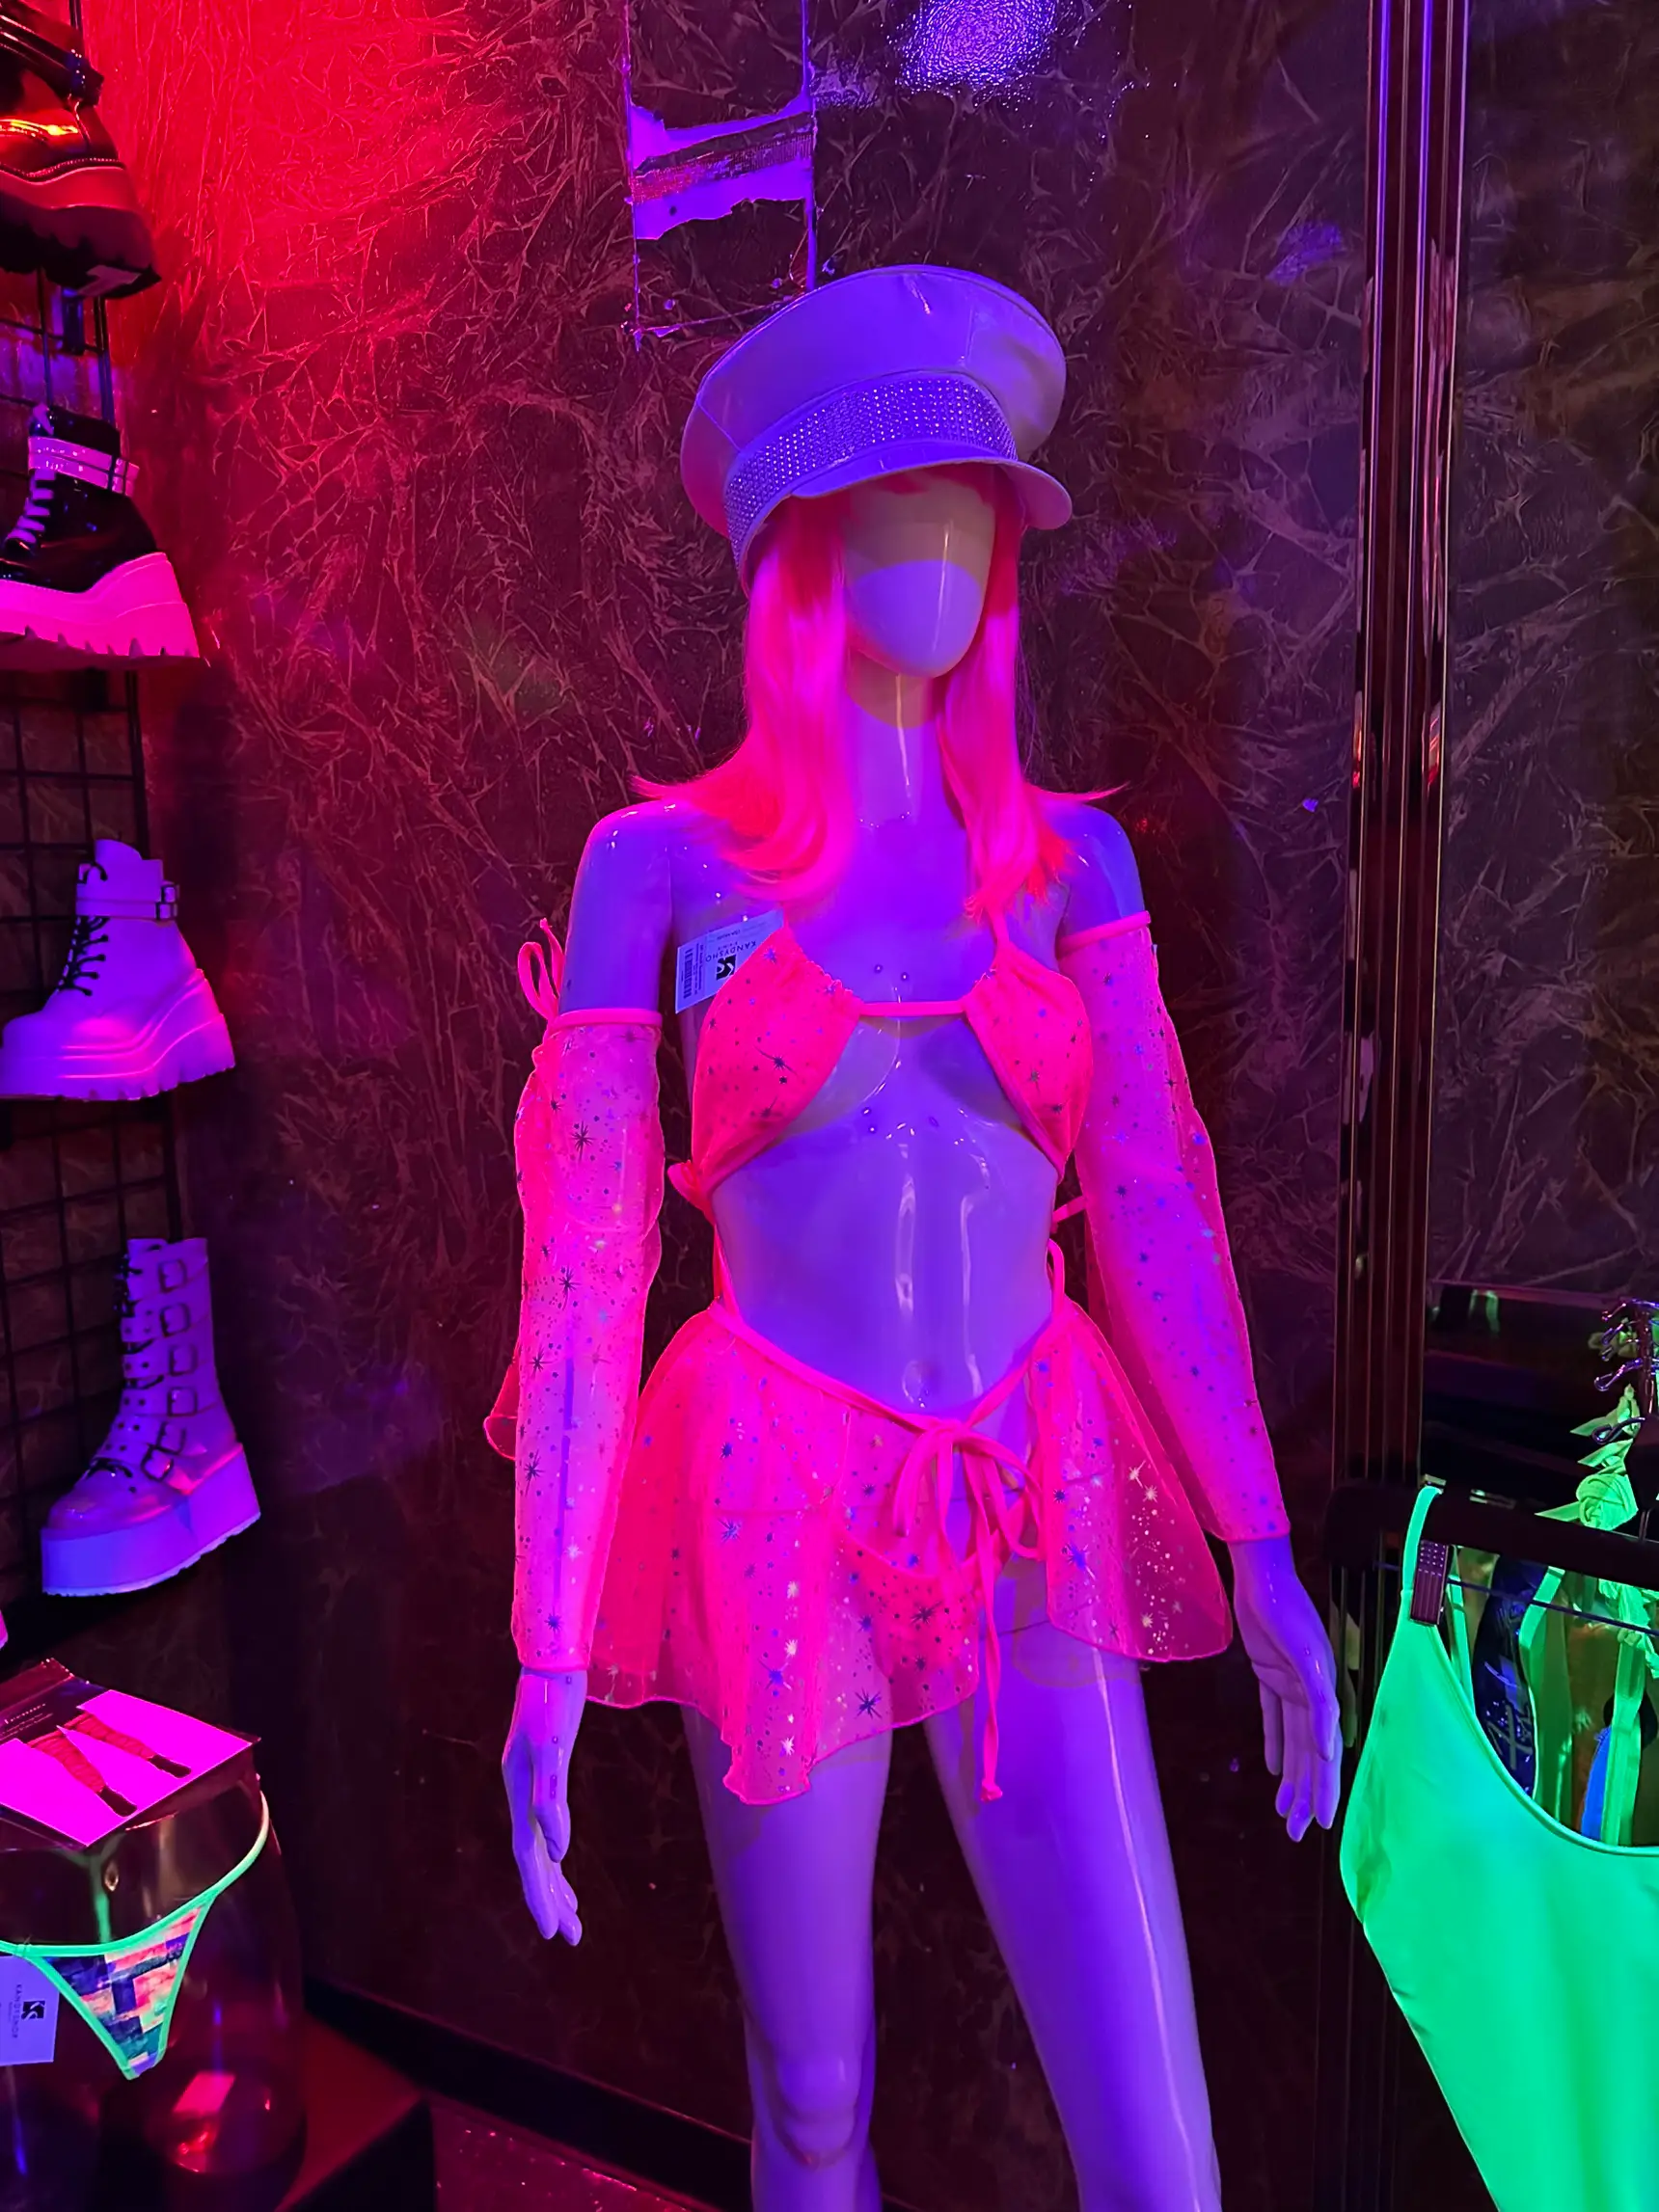 sweet rave outfits